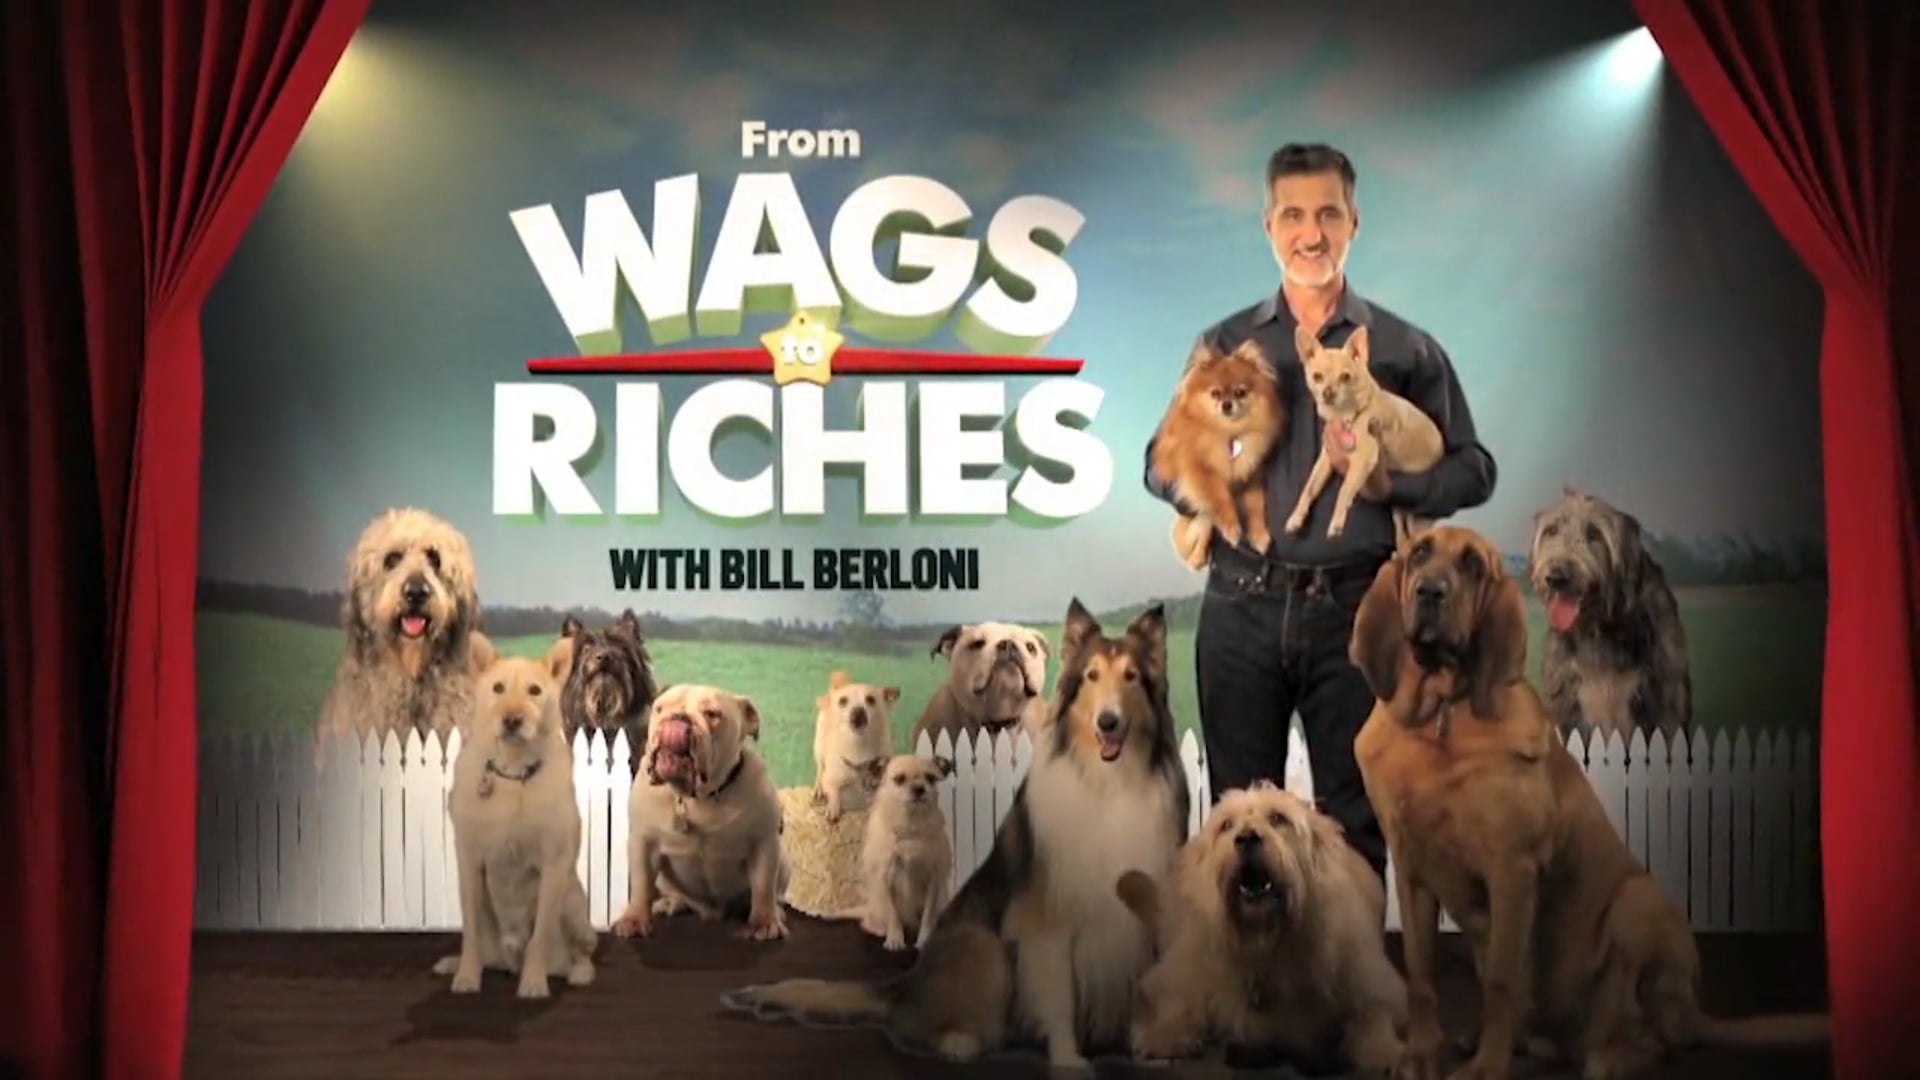 Wags to Riches with Bill Berloni